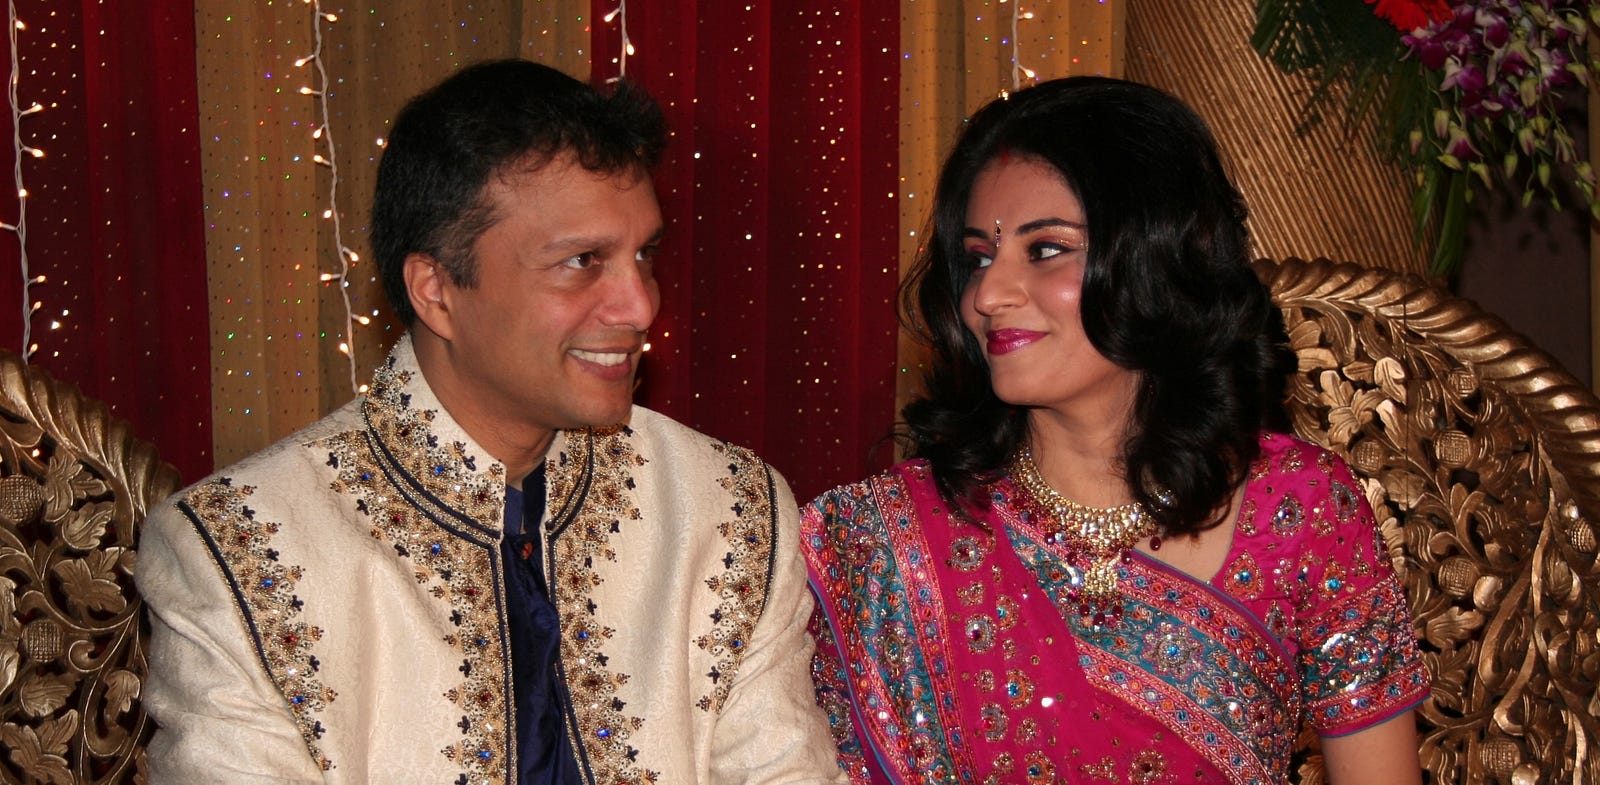 Author and his wife Rishika during their wedding reception